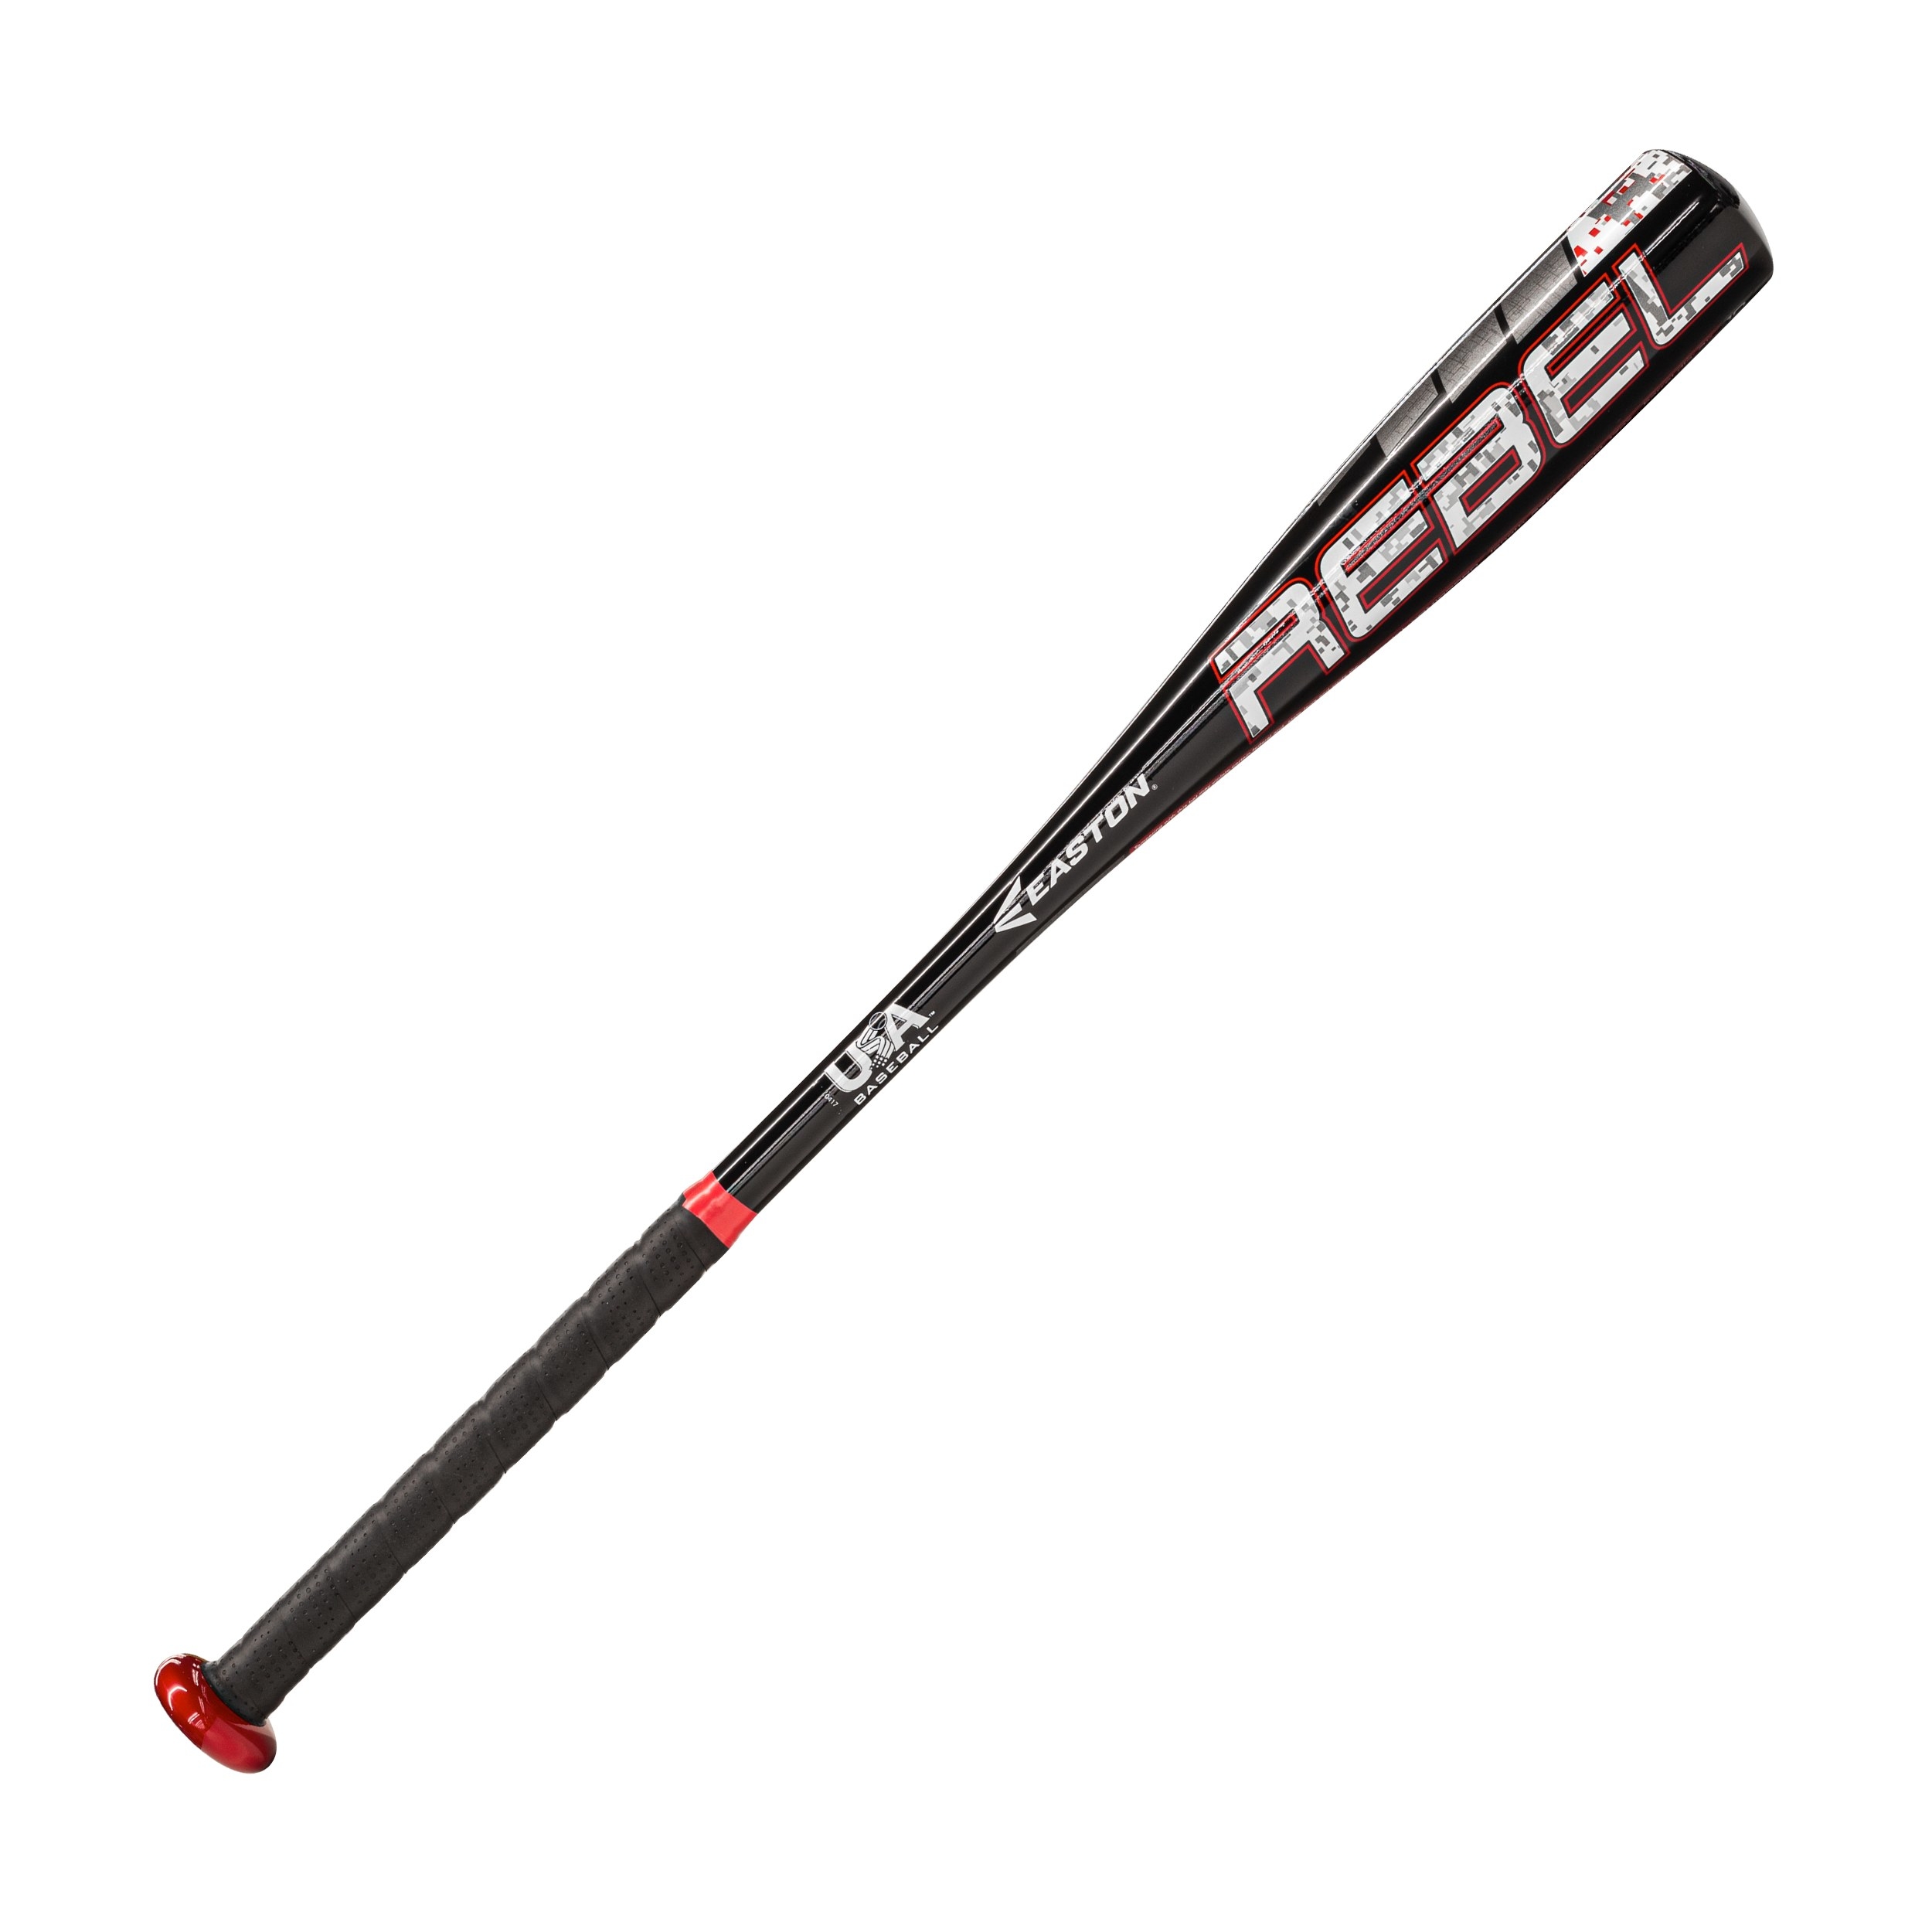 The black and red bat